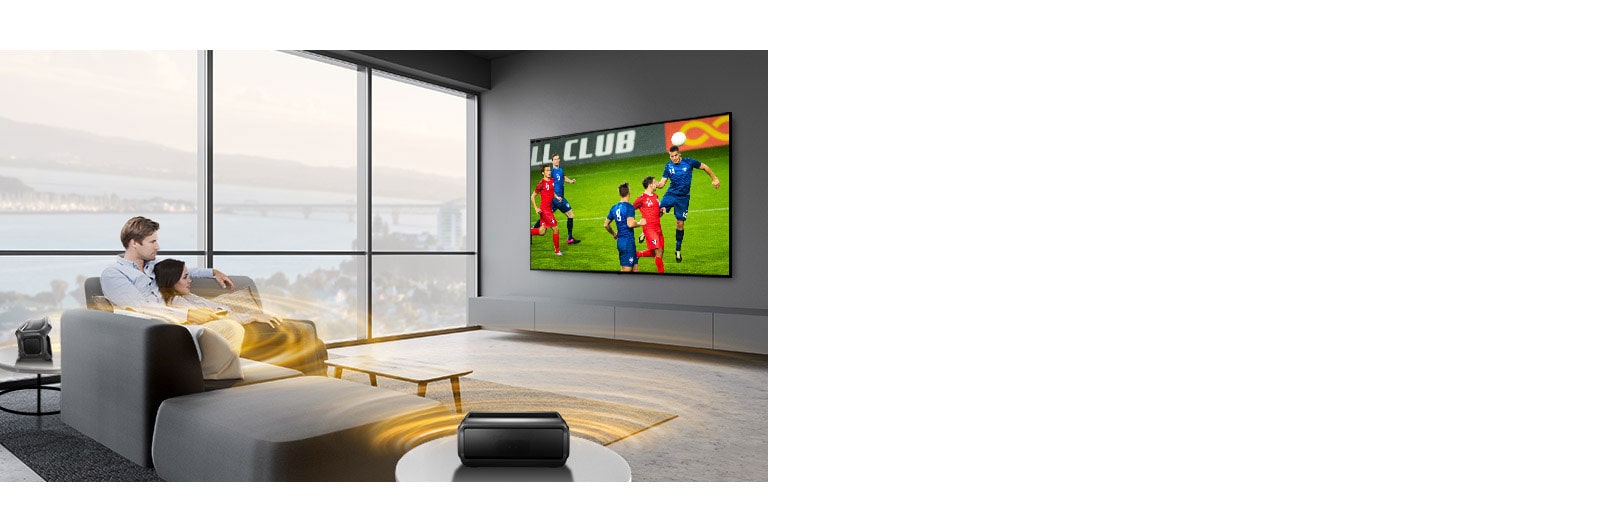 A man and women watching sports game on TV in the living room with Bluetooth rear speakers